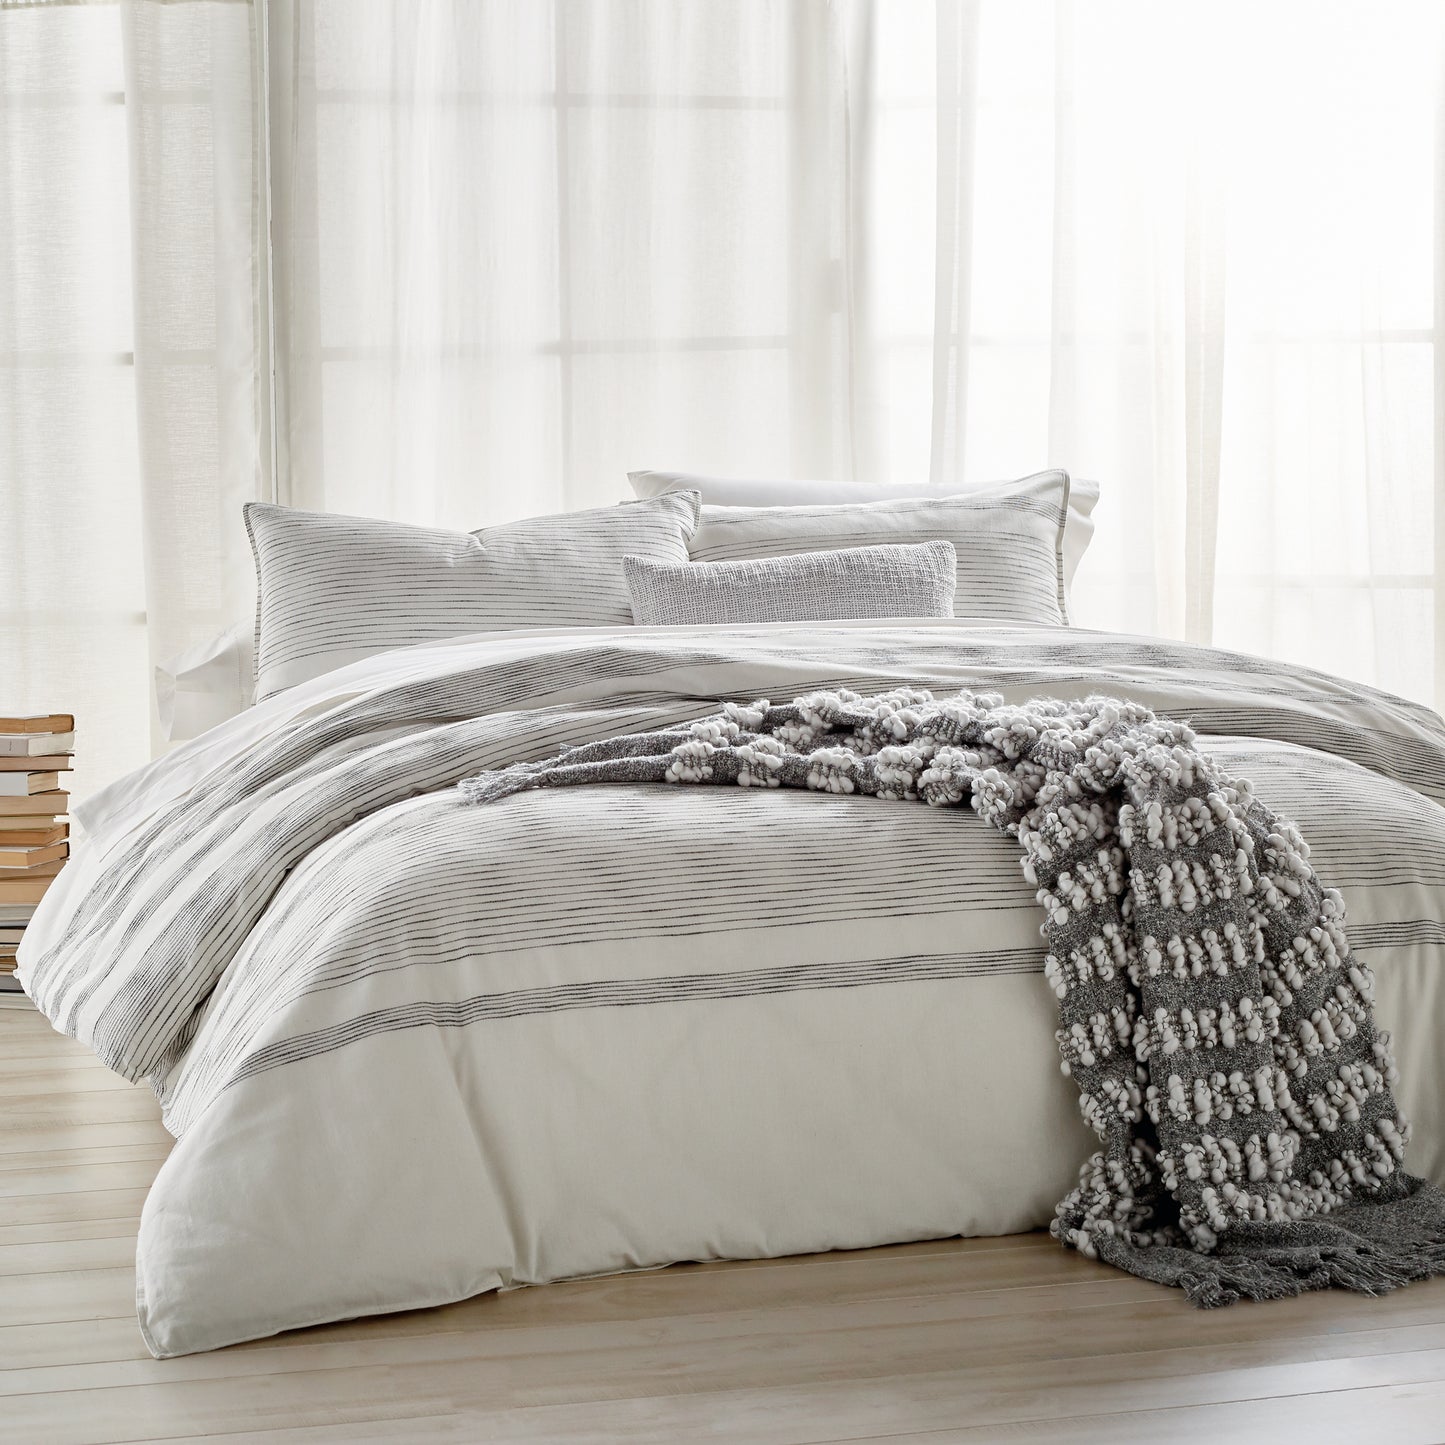 DKNY PURE Woven Stripe Bedding Collection